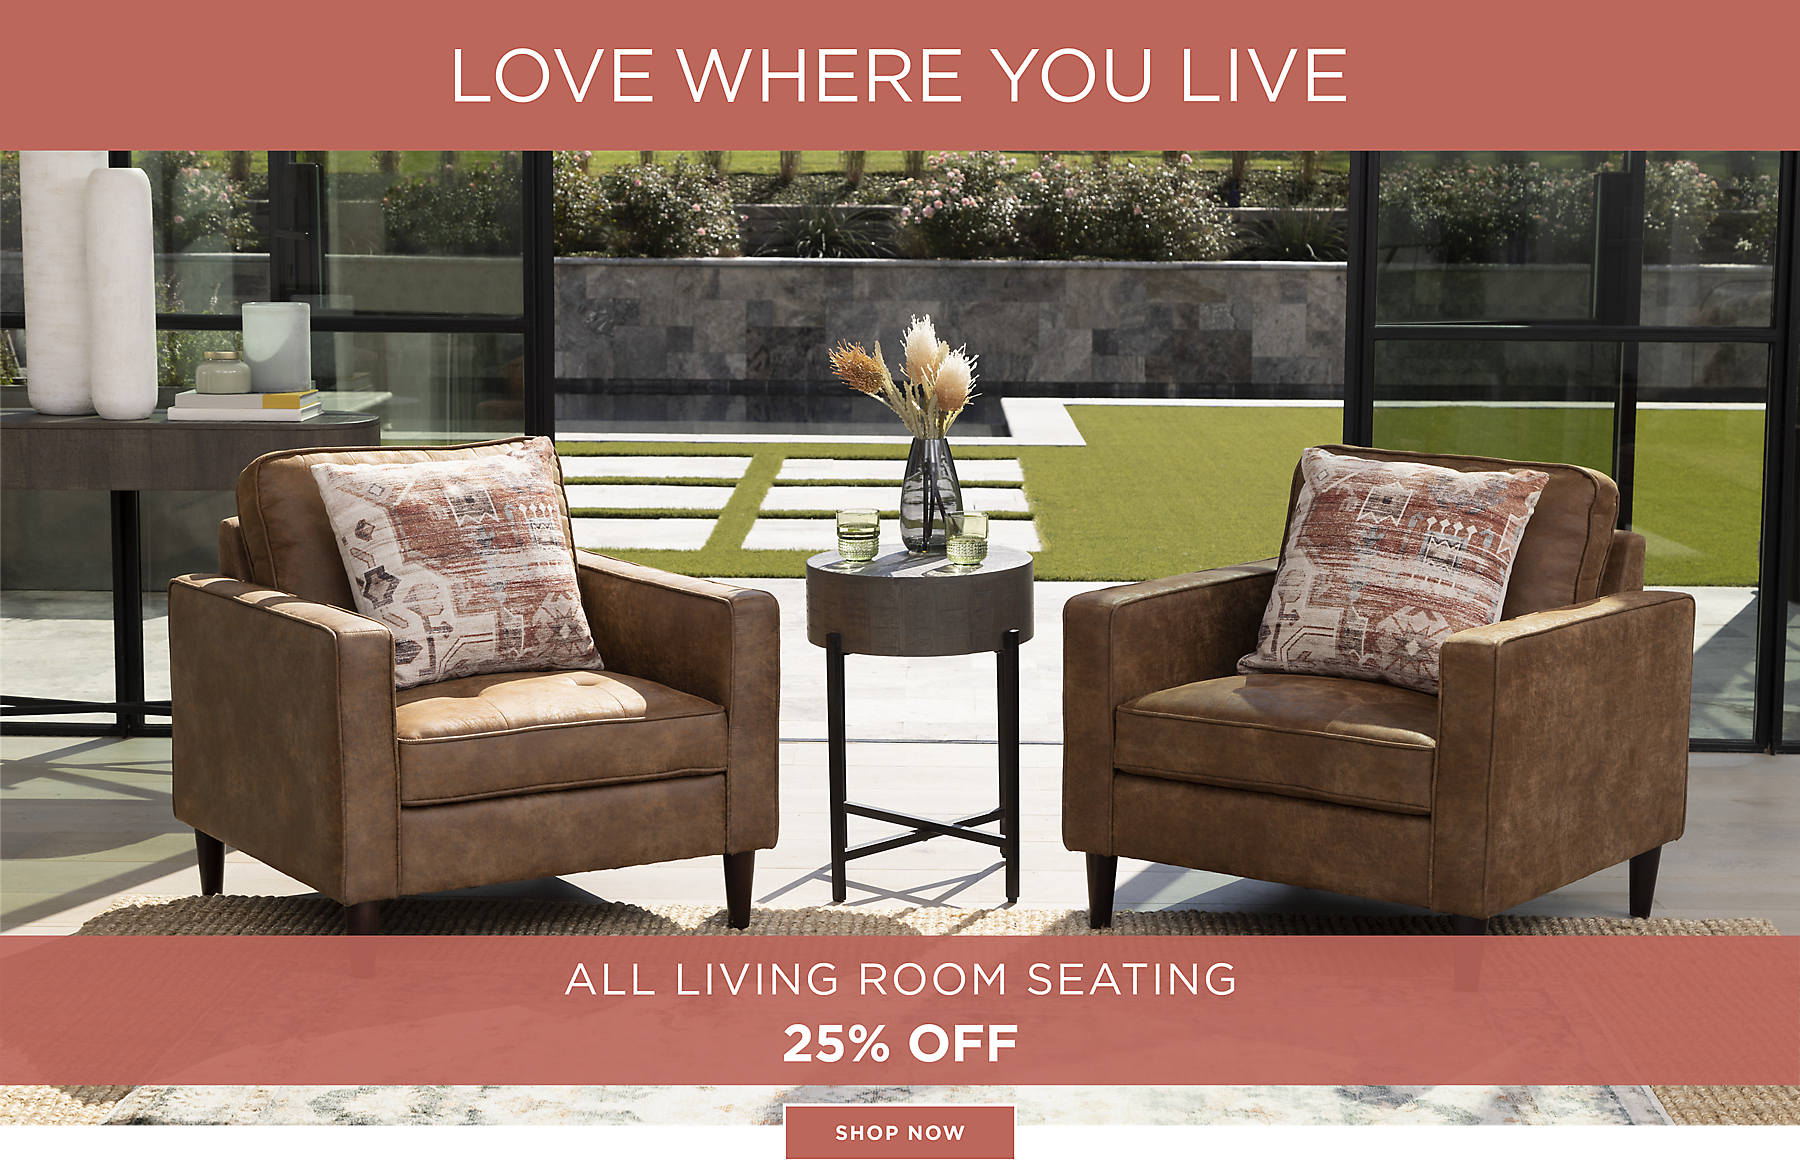 Love where you live All Living Room Seating 25% Off Shop Now